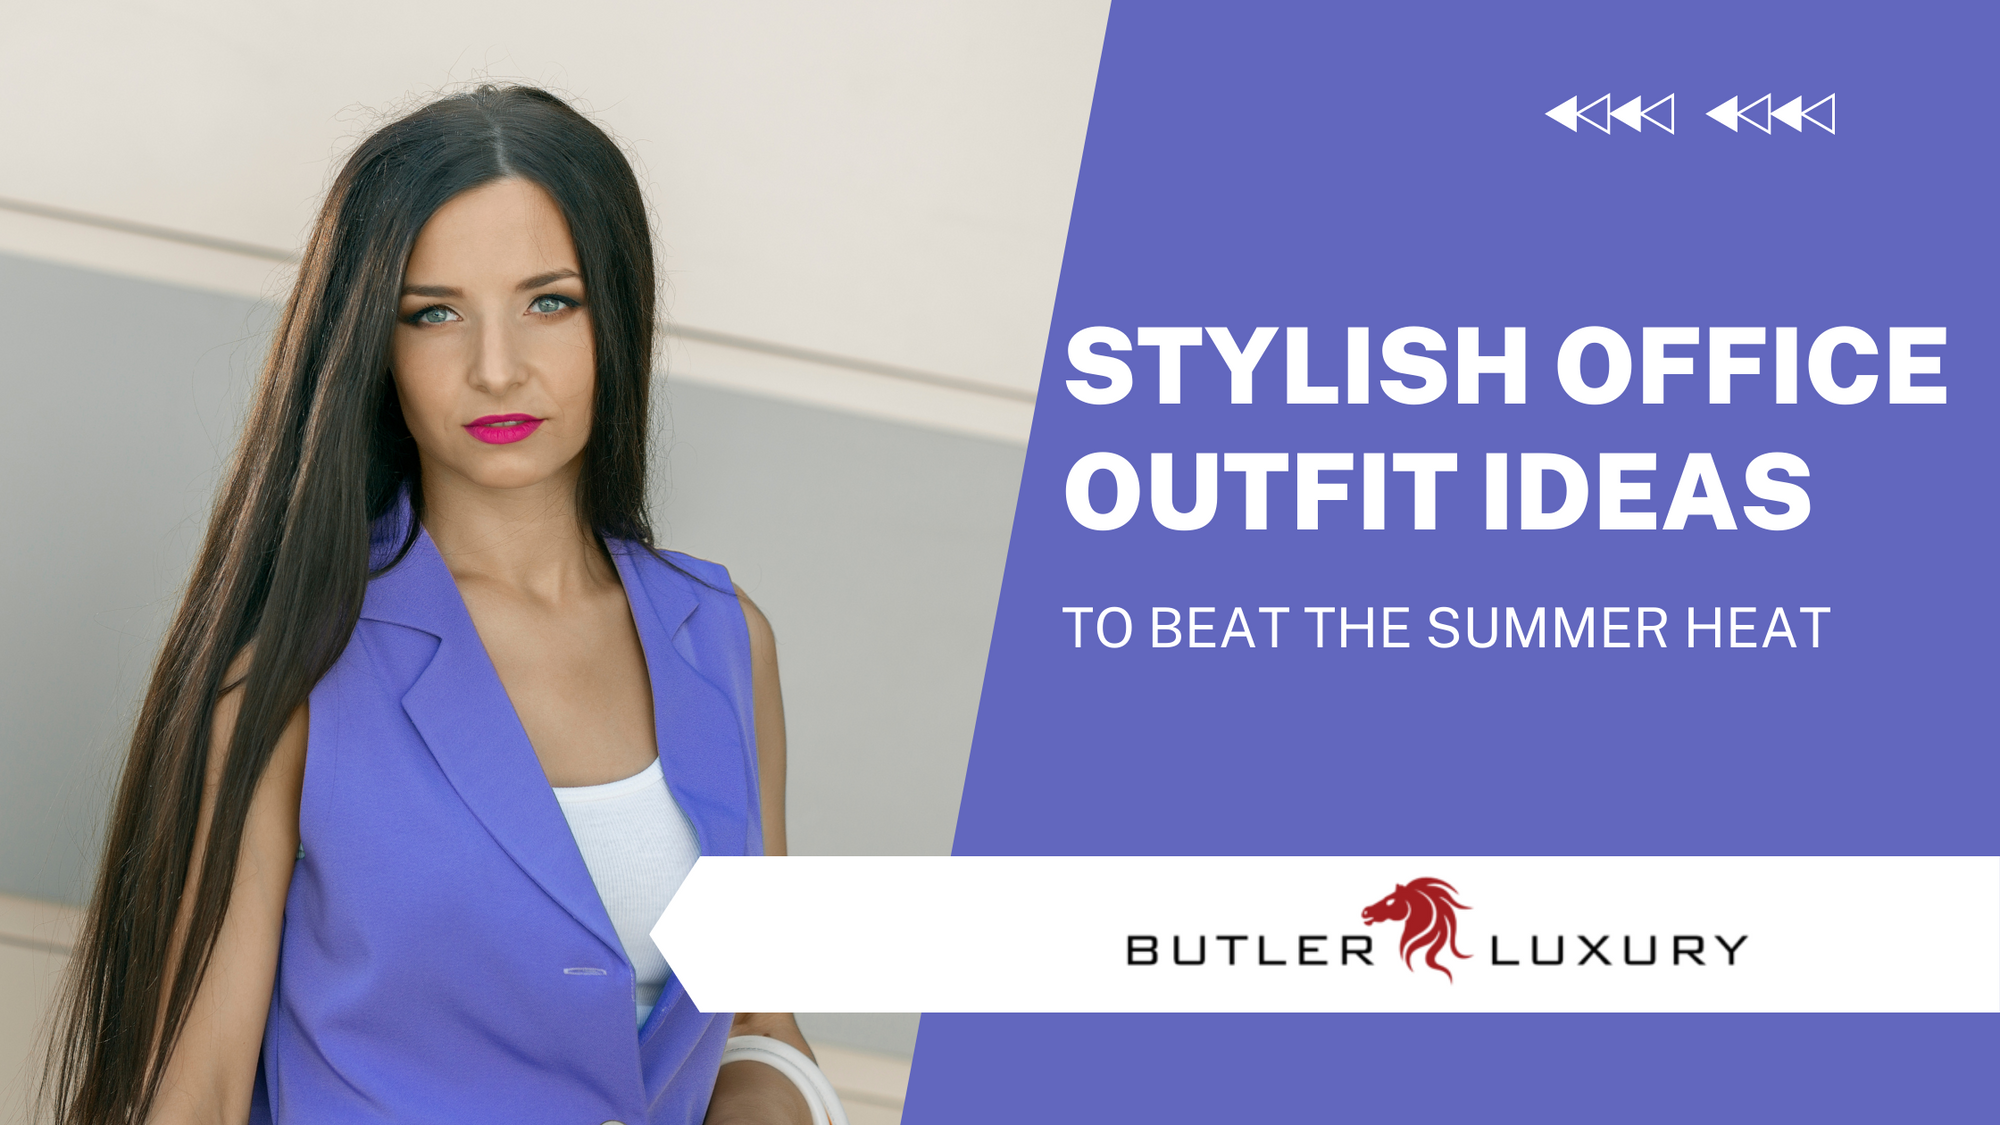 5 Stylish Office Outfit Ideas to Beat the Summer Heat